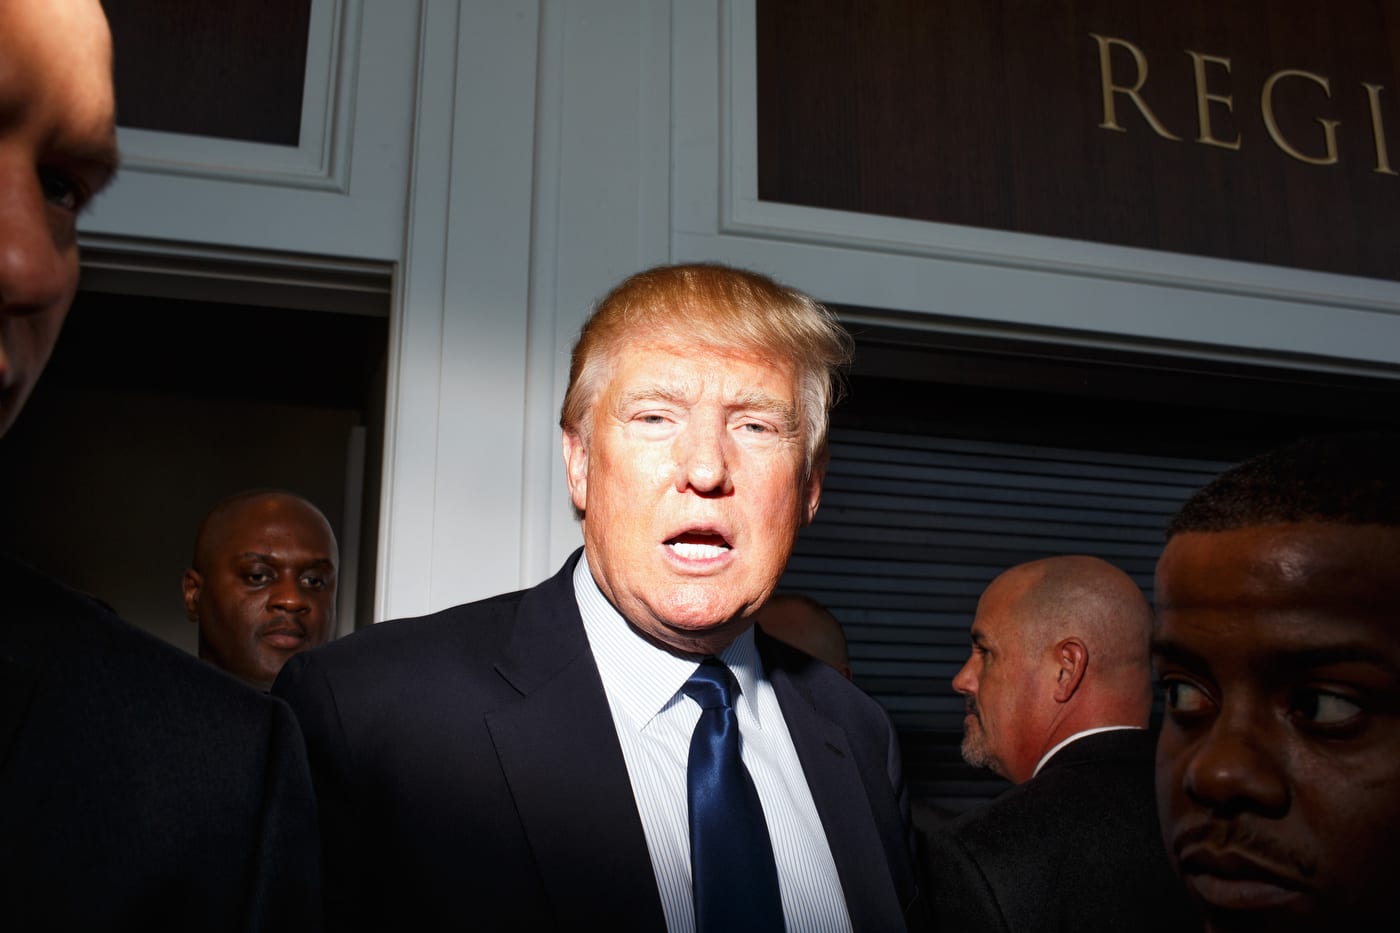 Donald Trump, surrounded by security, makes his way to a series of media interviews at CPAC in National Harbor, MD on Friday, February 27, 2015.